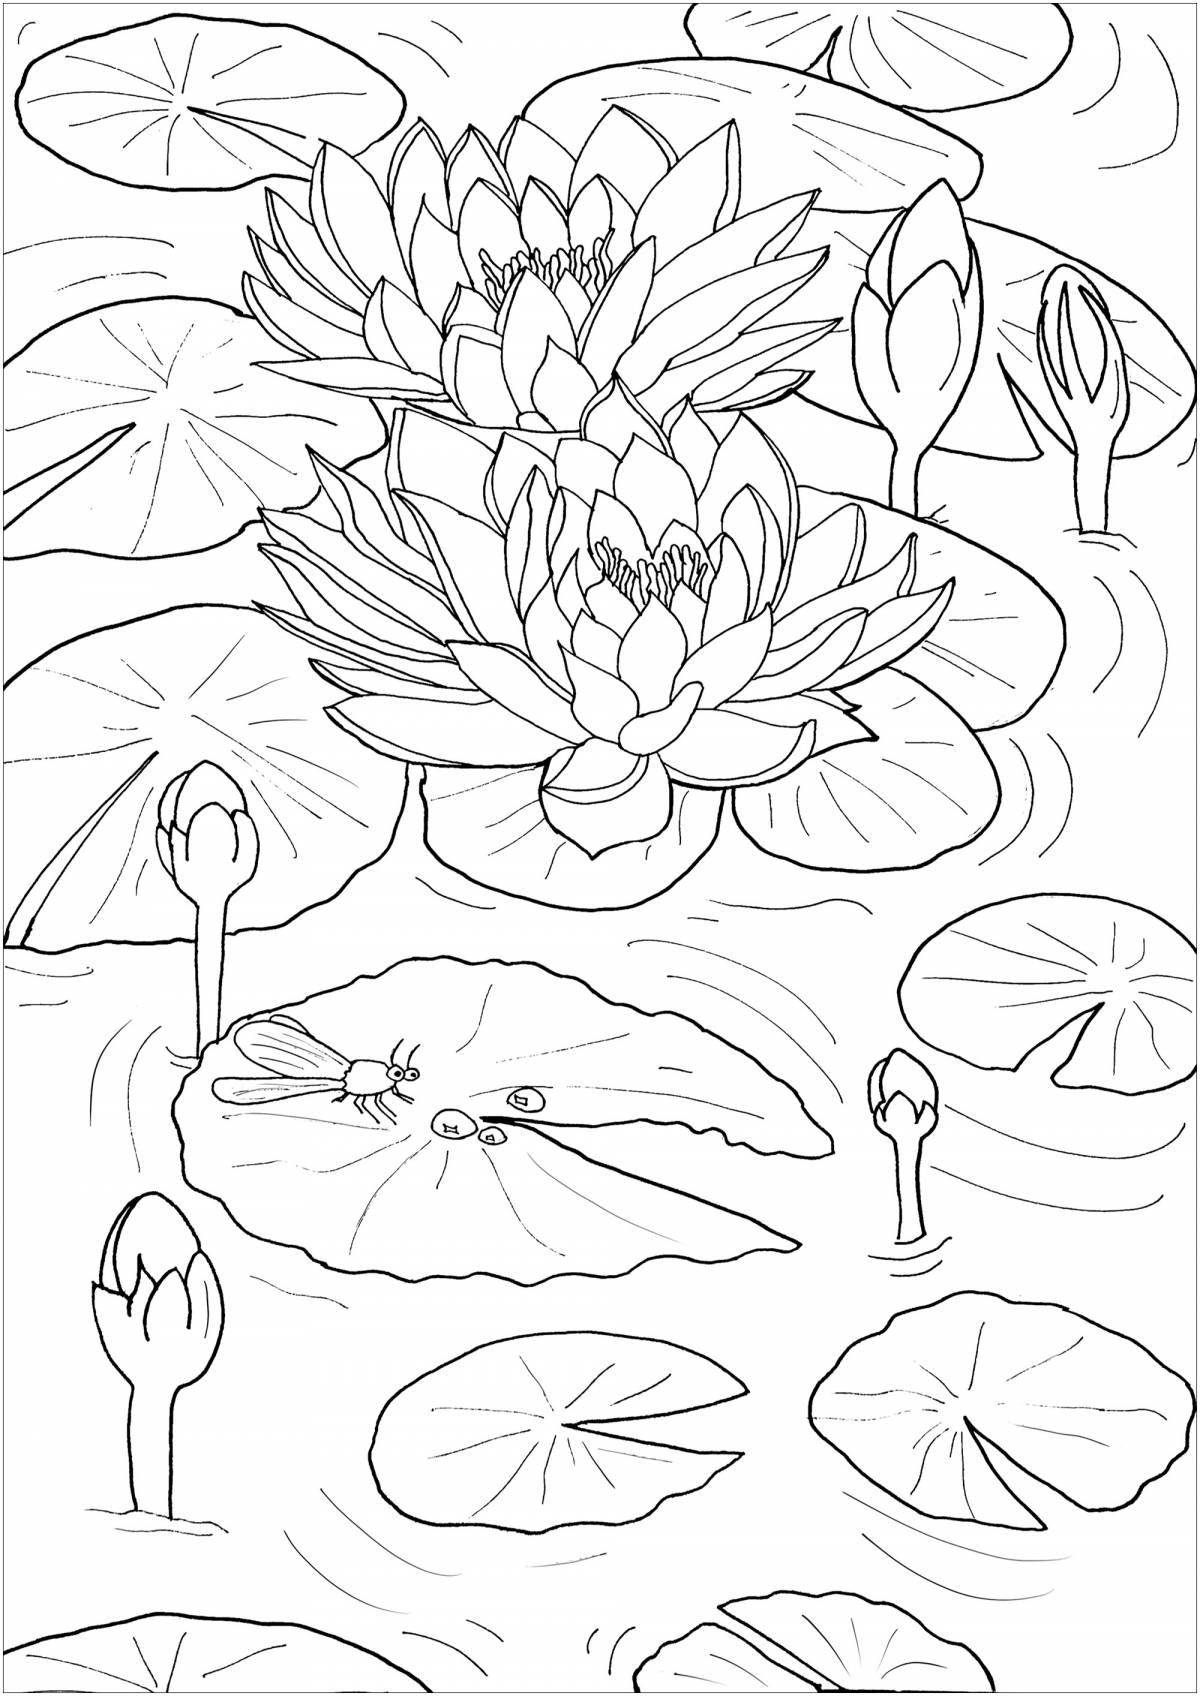 Shining sea lily coloring page